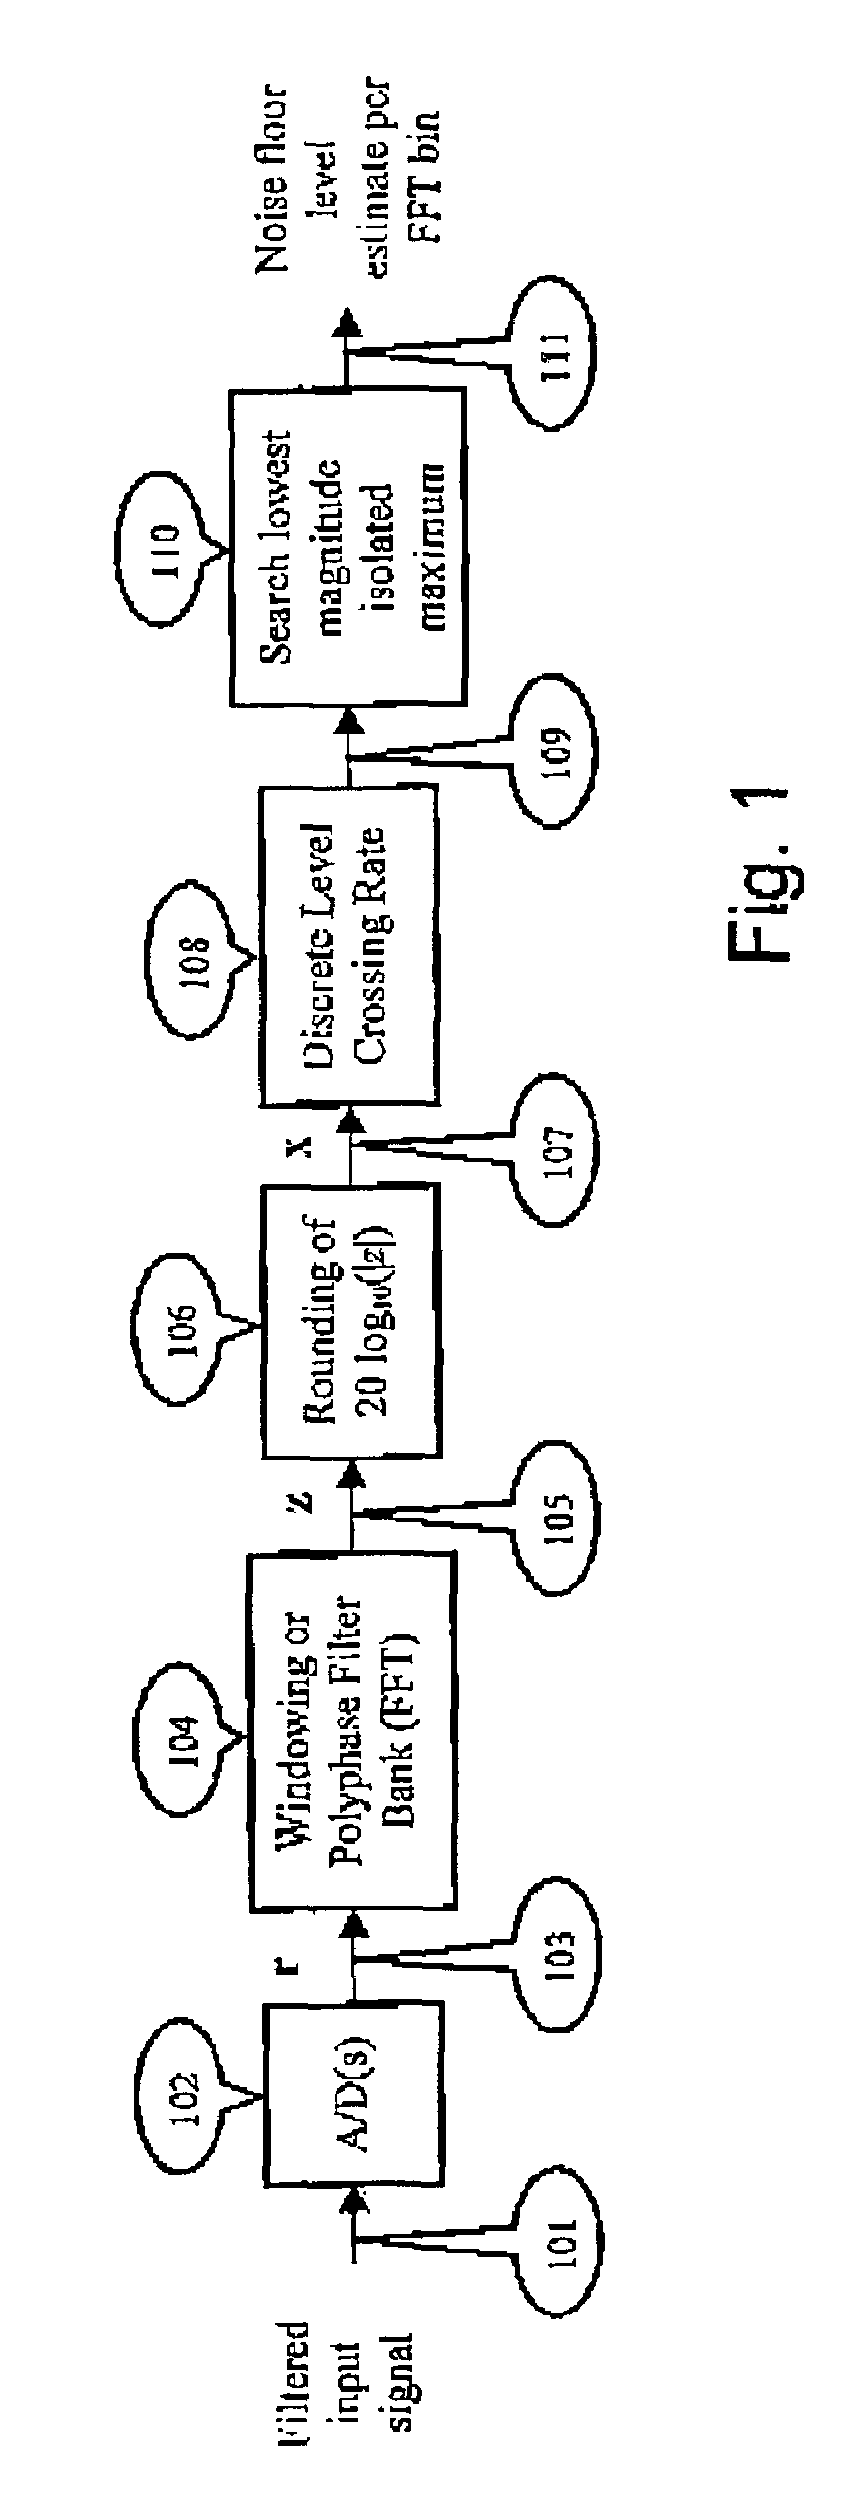 Method and apparatus for noise floor estimation